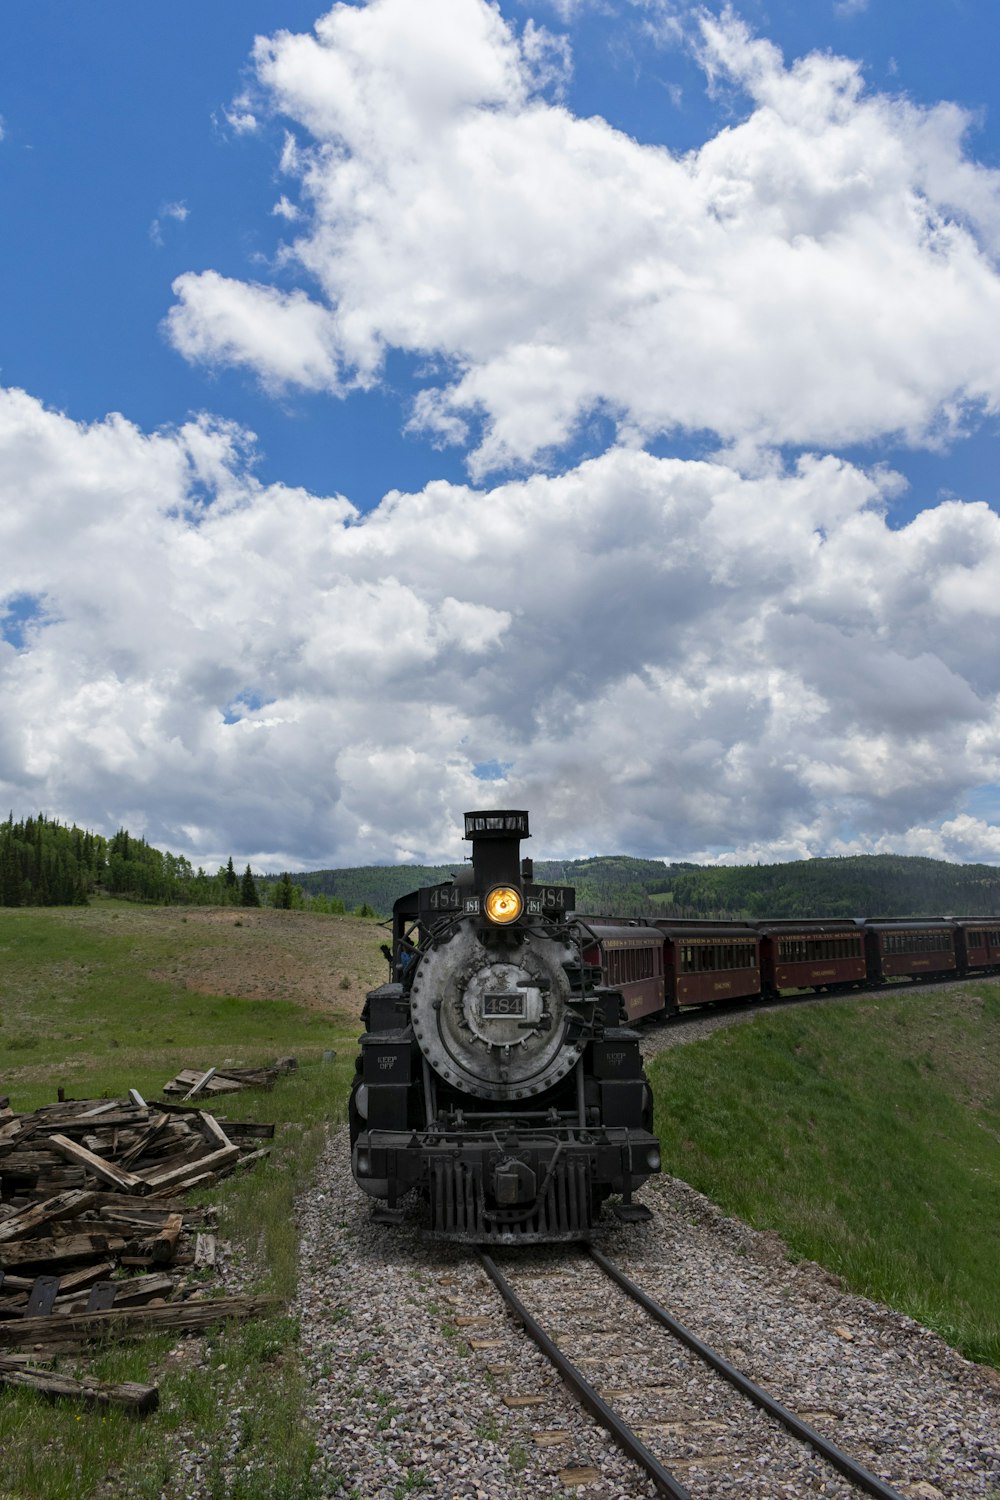 black train on rail under cloudy sky during daytime